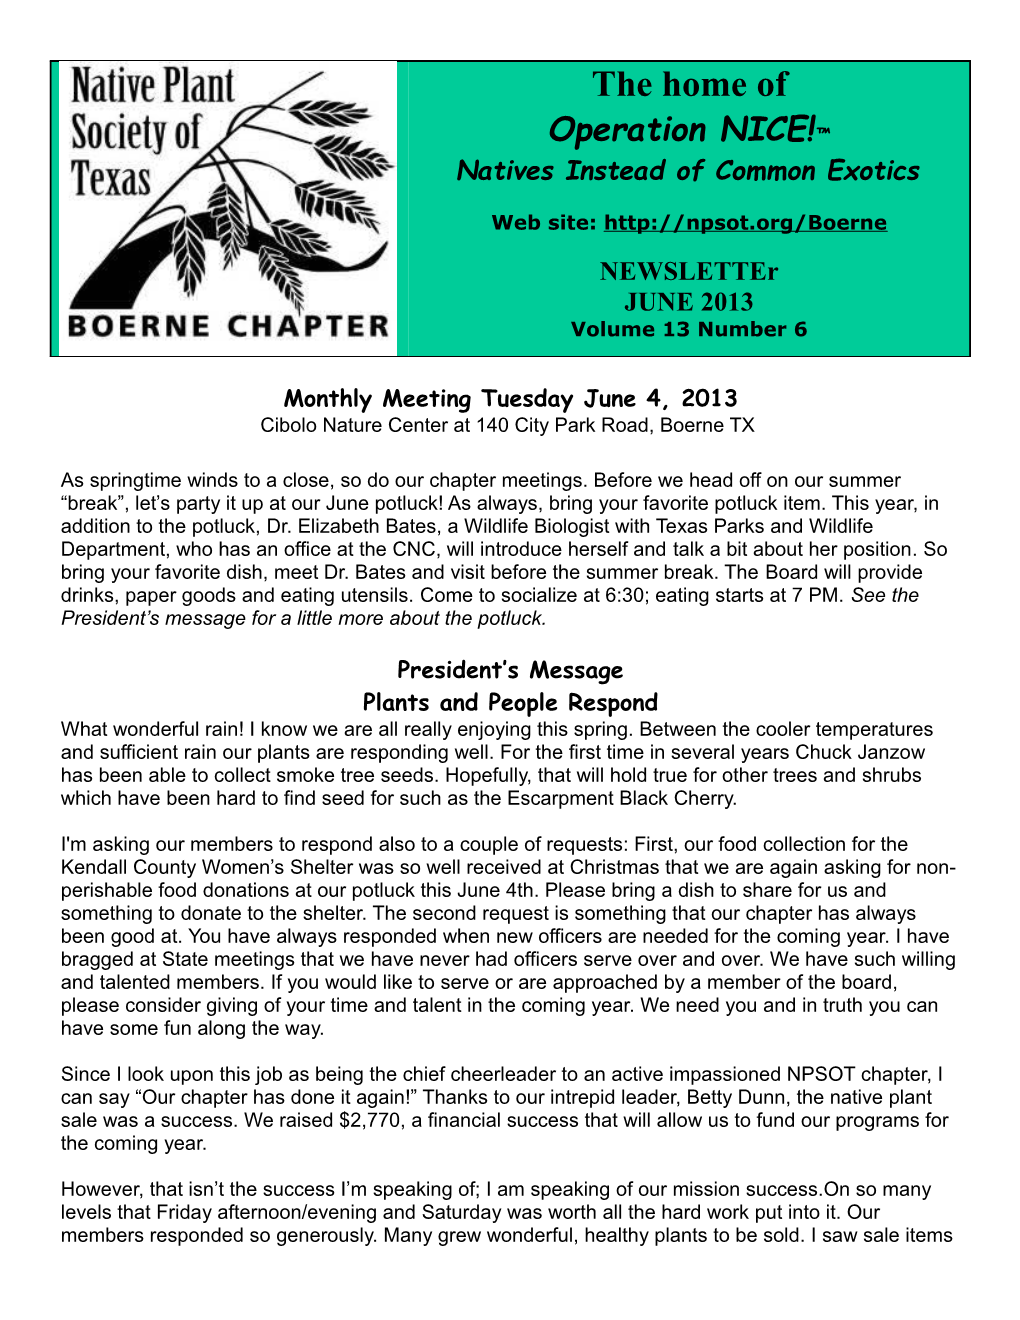 Monthly Meeting Tuesday June 4, 2013